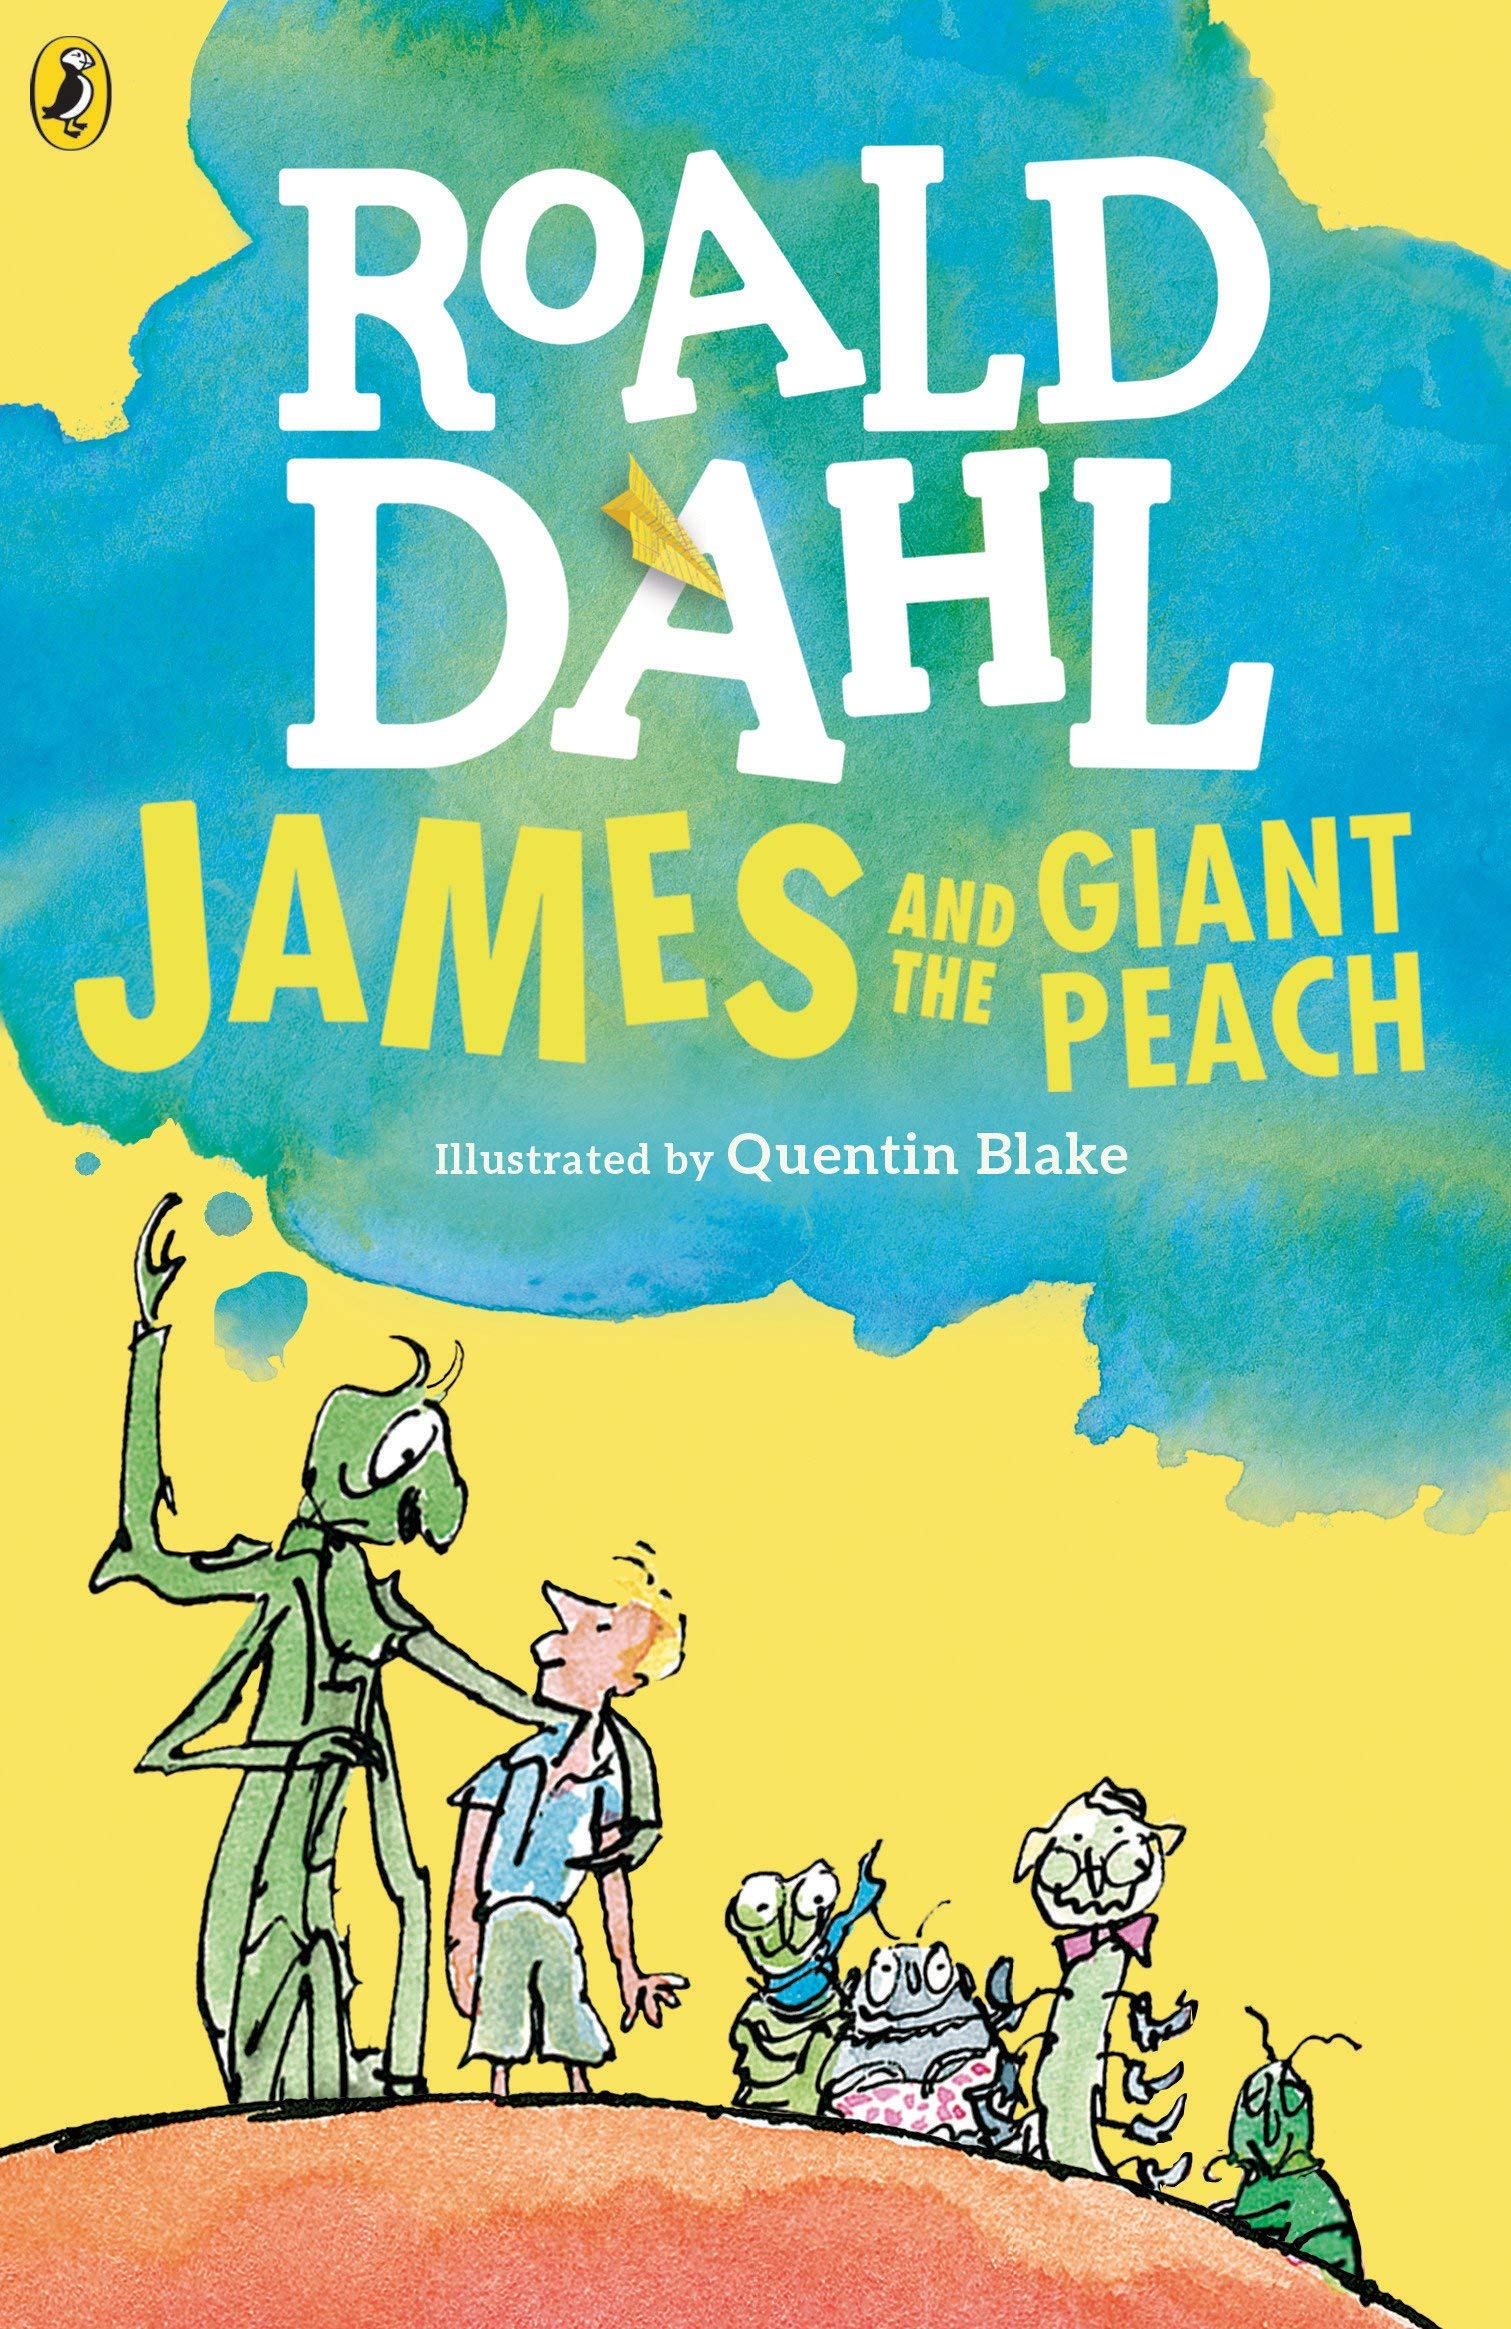 James and the Giant Peach by Roald Dahl Free Download